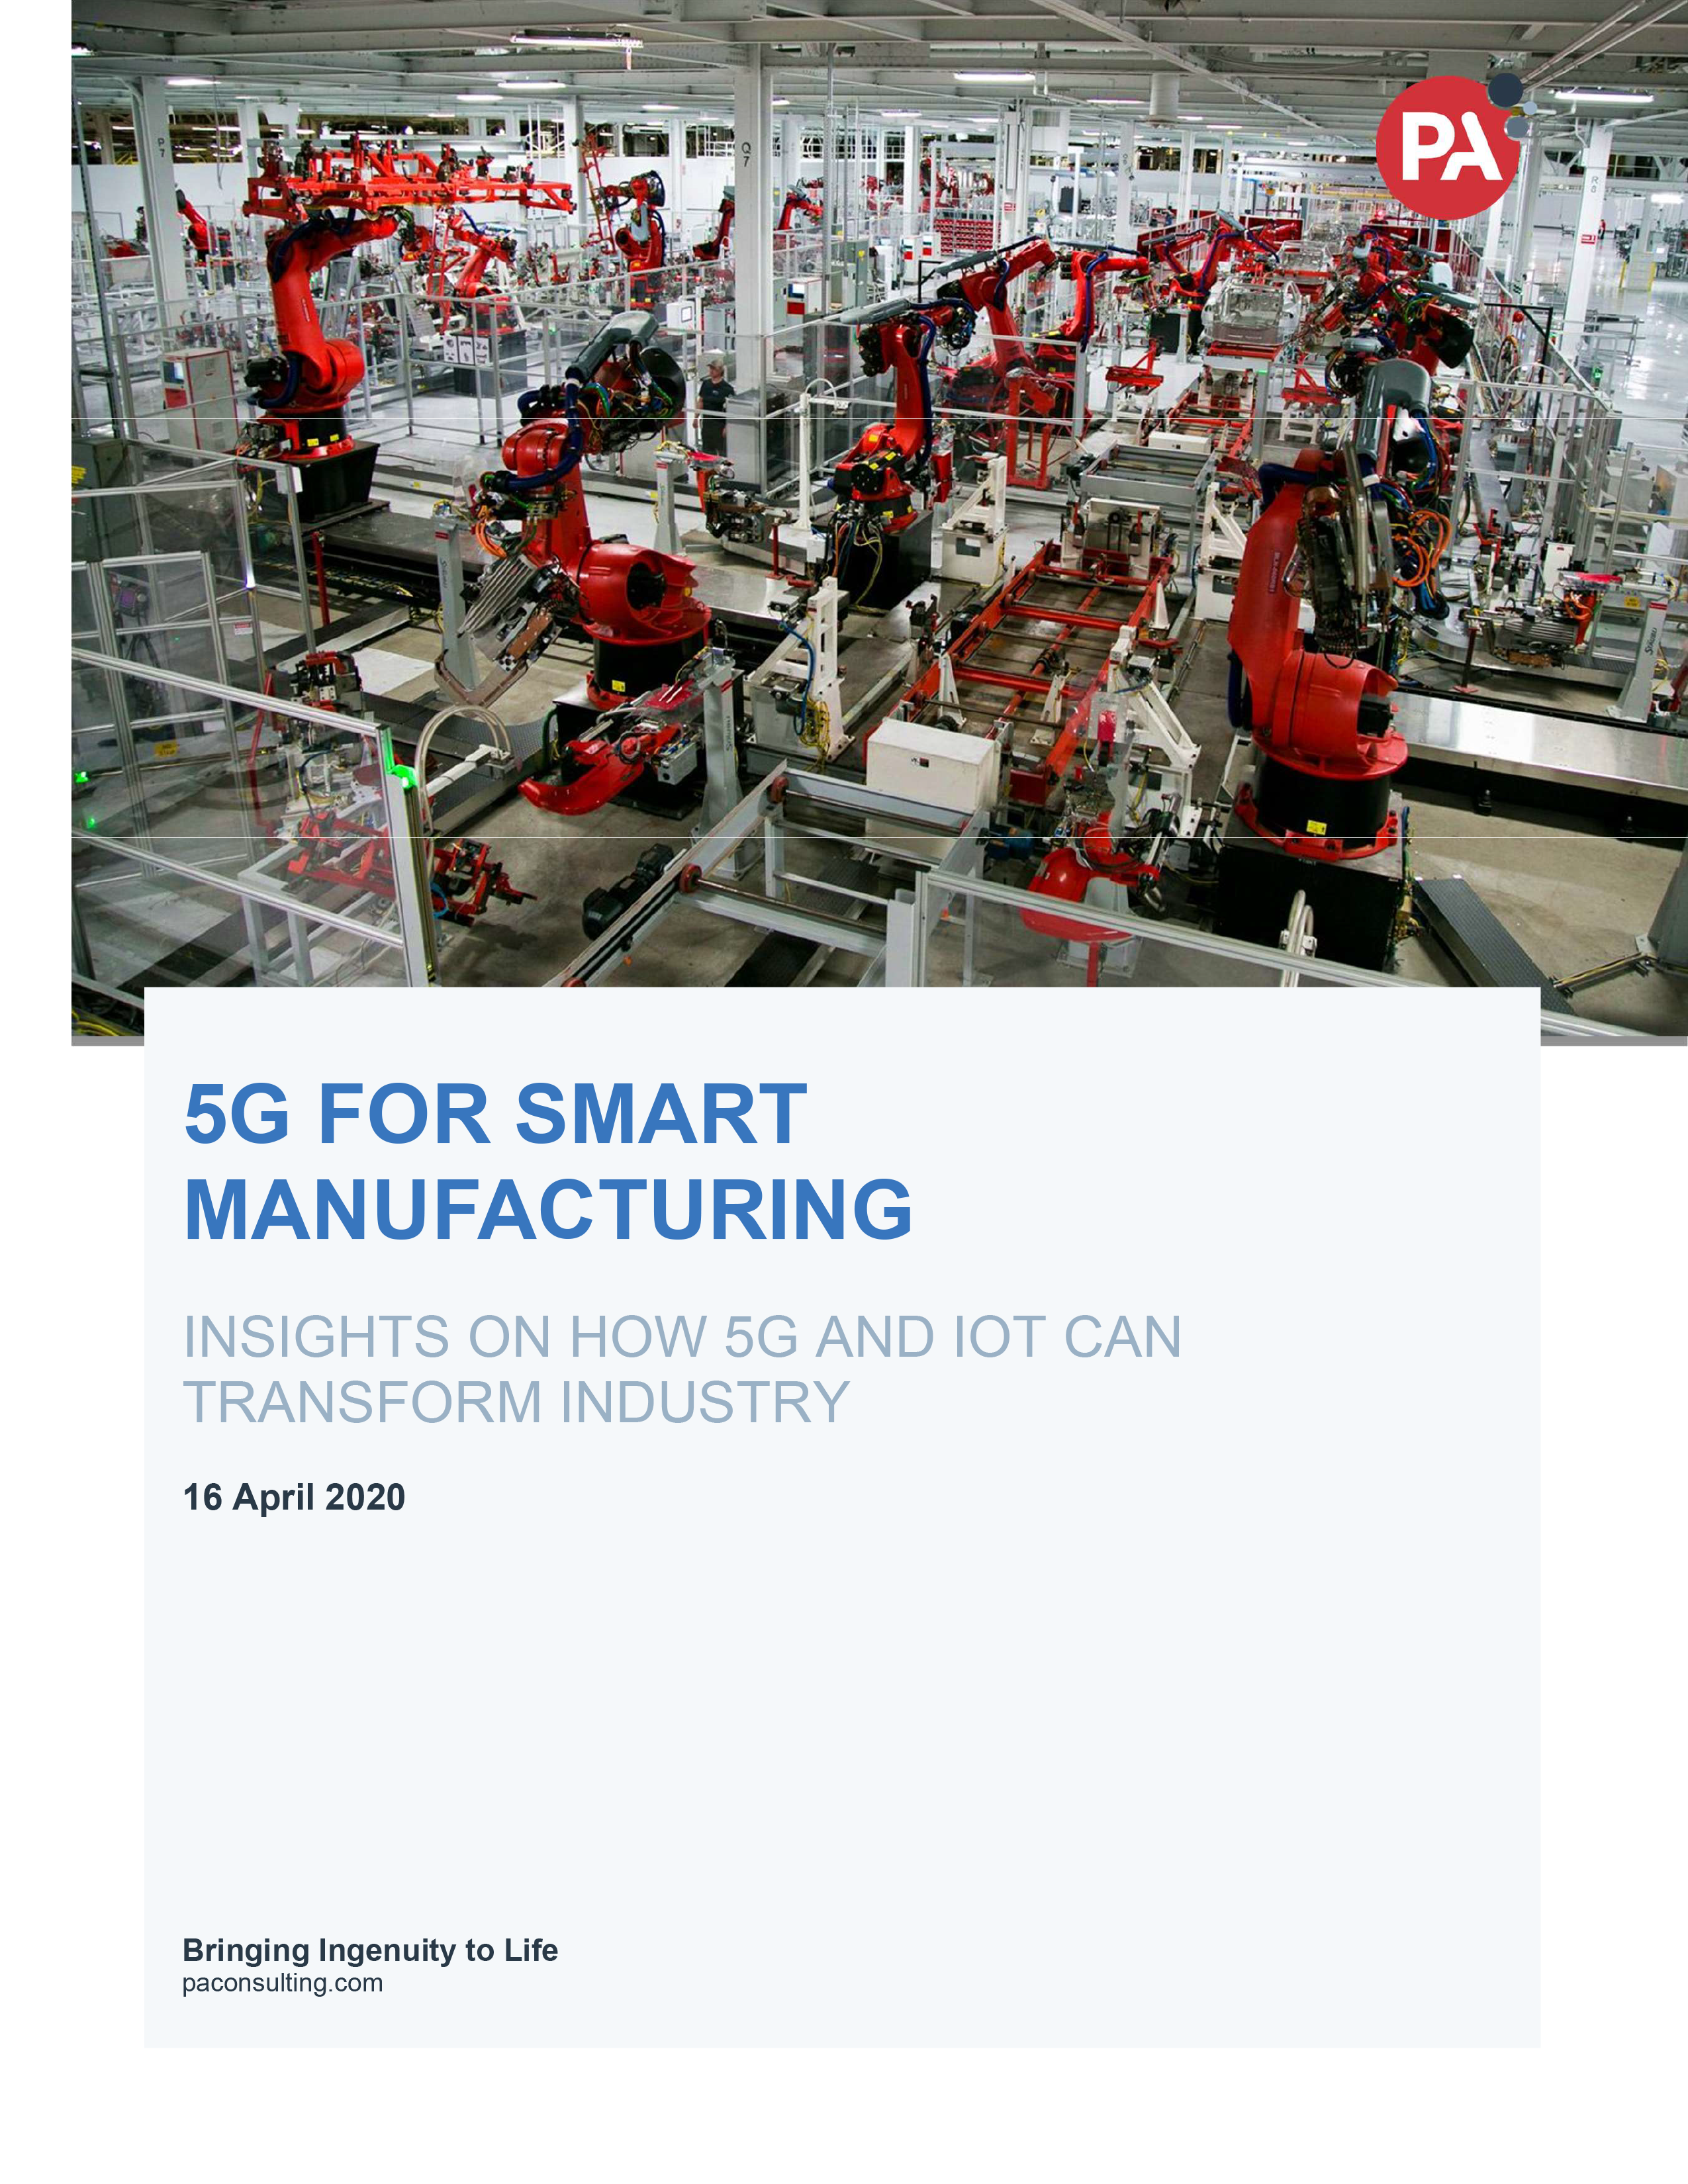 5G for Smart Manufacturing – Insights on How 5G and IoT Can Transform Industry image